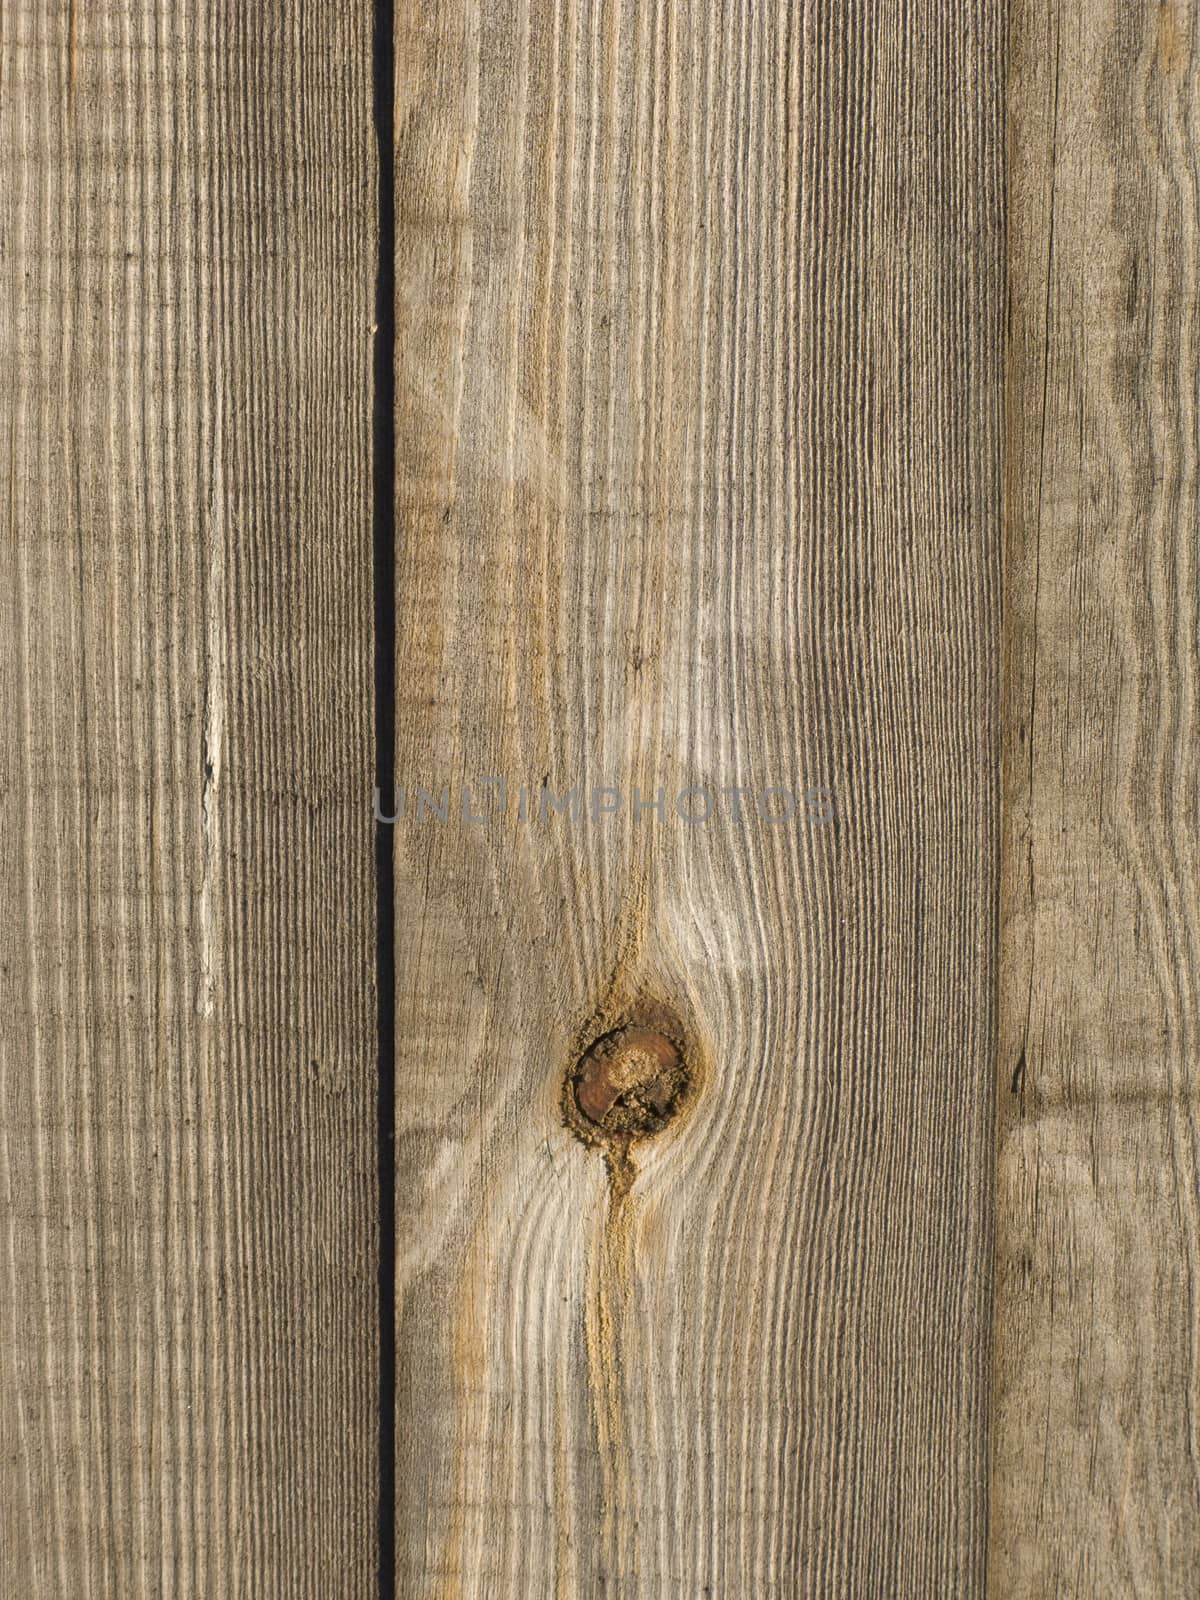 Knotted wooden board background by wander